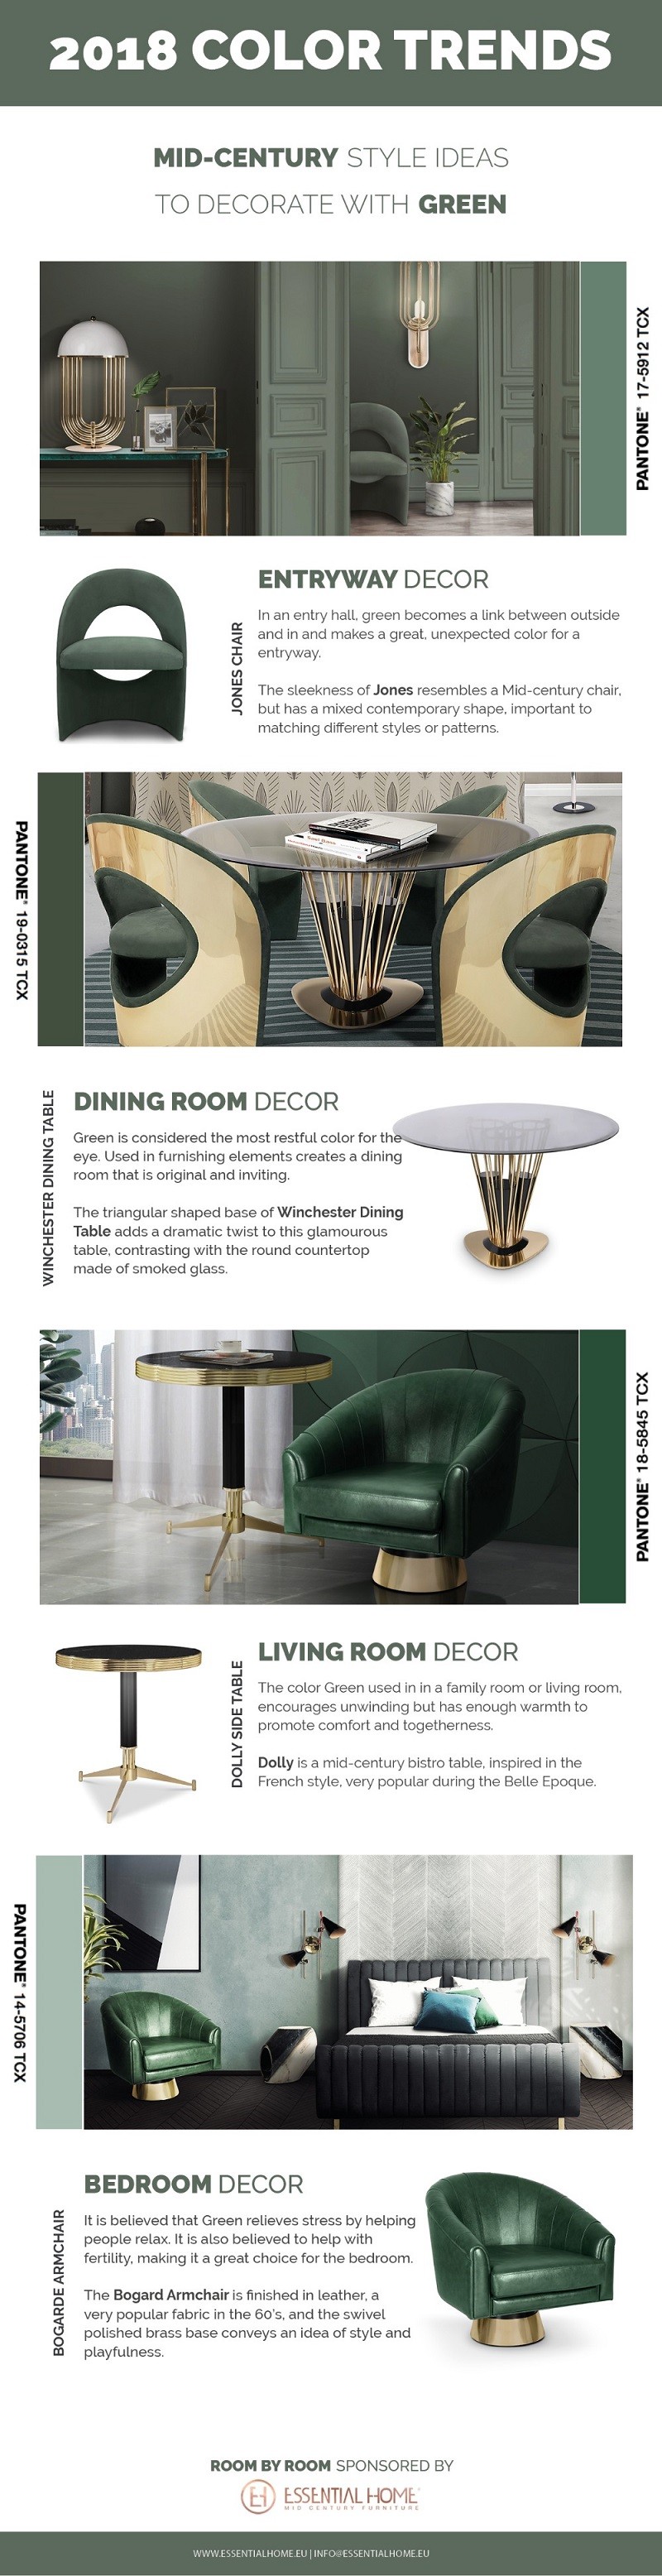 2018 Color Trends – Awesome Mid Century Home Decor Ideas With Green ➤ Discover the season's newest designs and inspirations. Visit Design Build Ideas at www.designbuildideas.eu #designbuildideas #homedecorideas #InteriorDesignProjects @designbuildidea